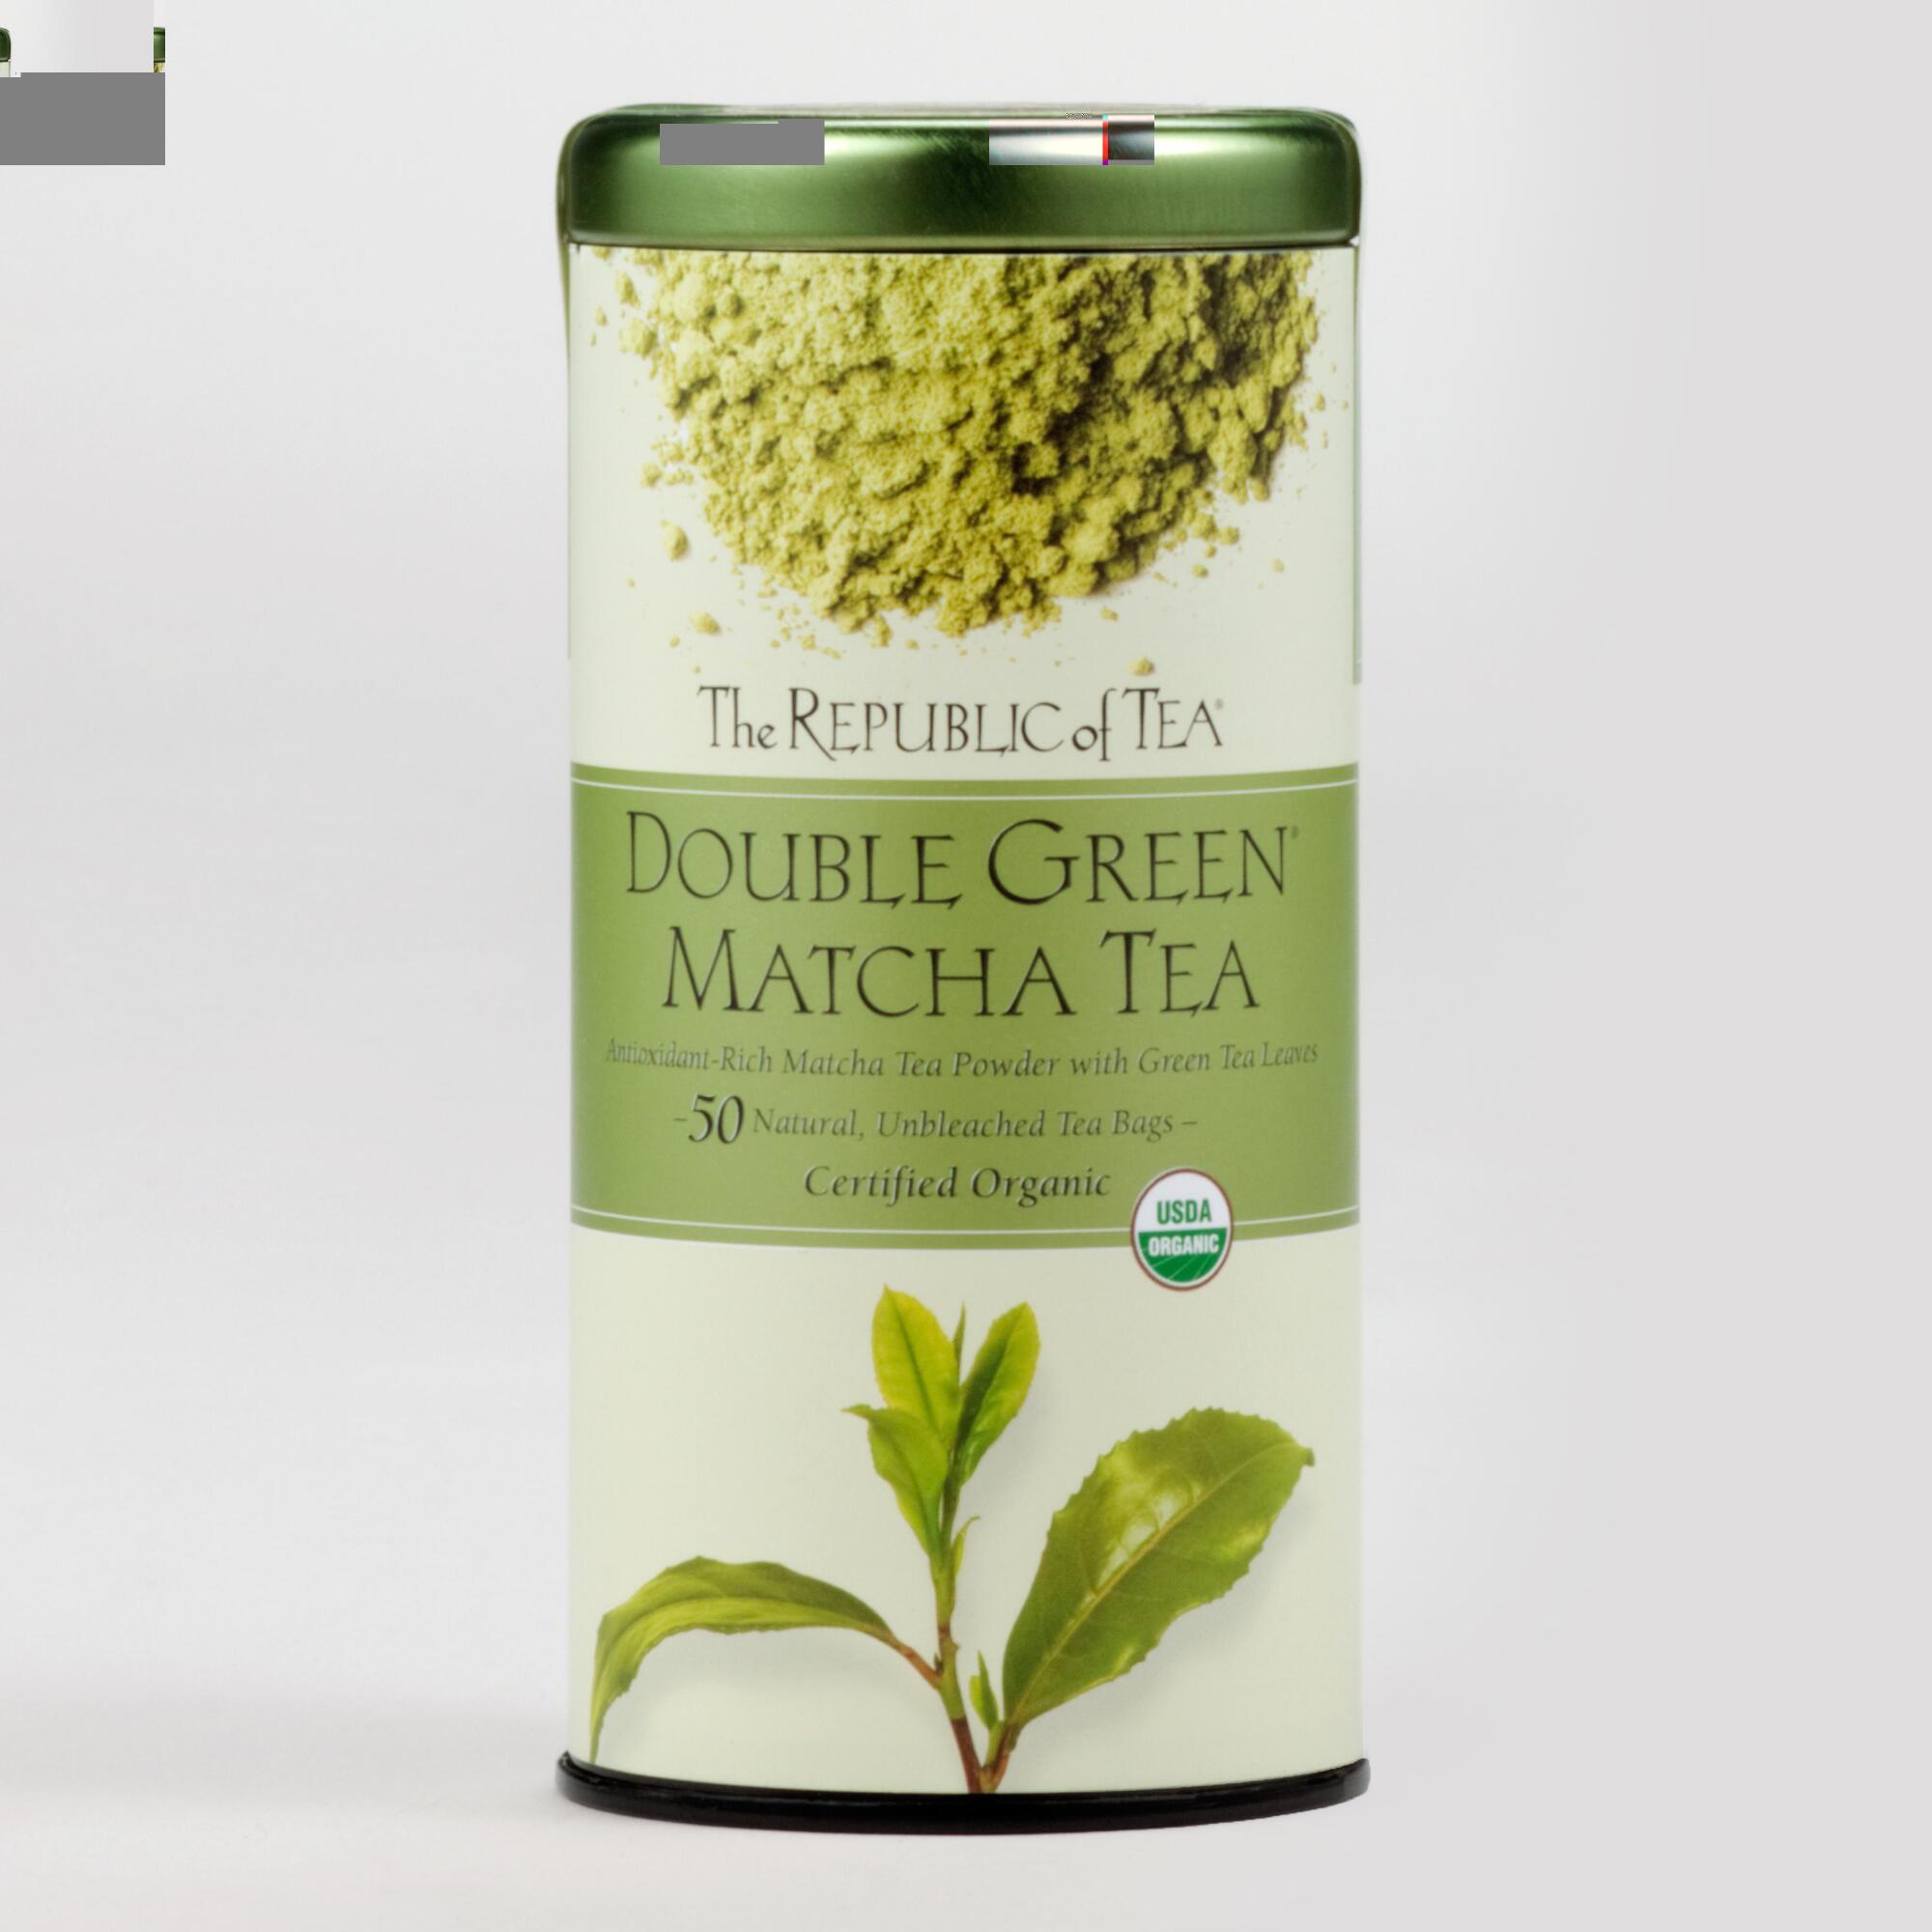 The Republic Of Tea Double Green Matcha Tea 50 Count by World Market